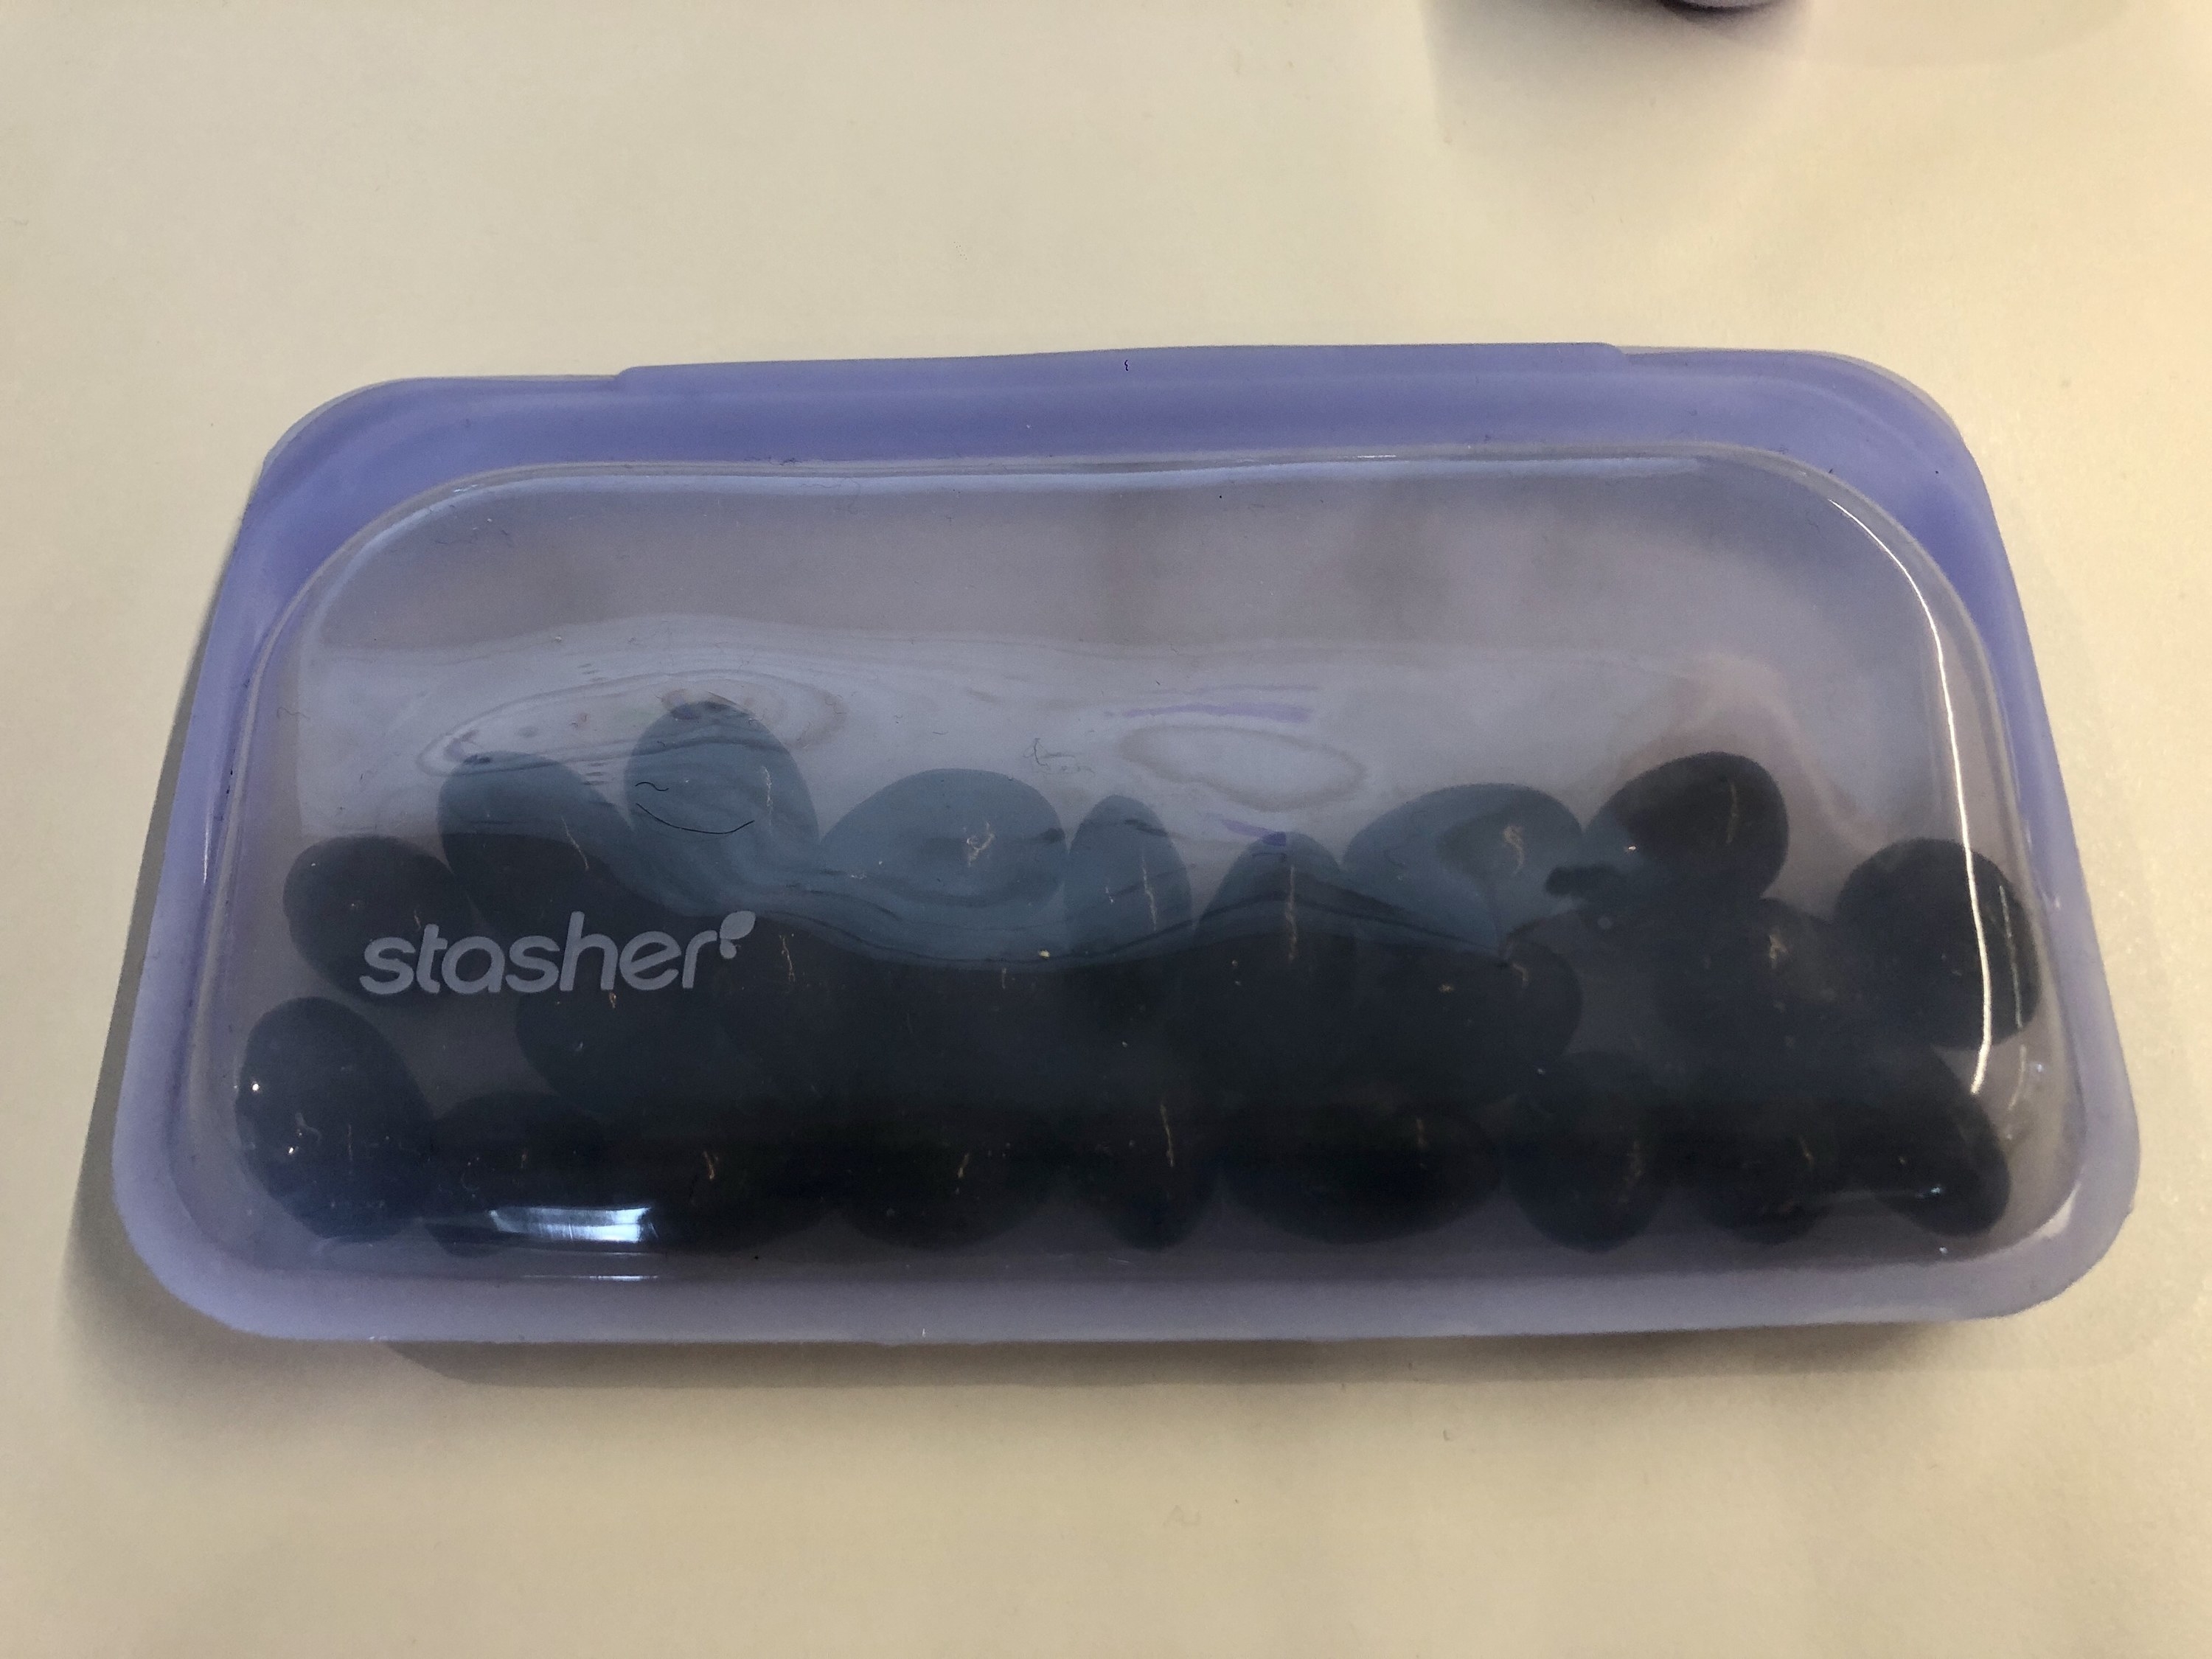 buzzfeed writer&#x27;s stasher bag in purple filled with almonds